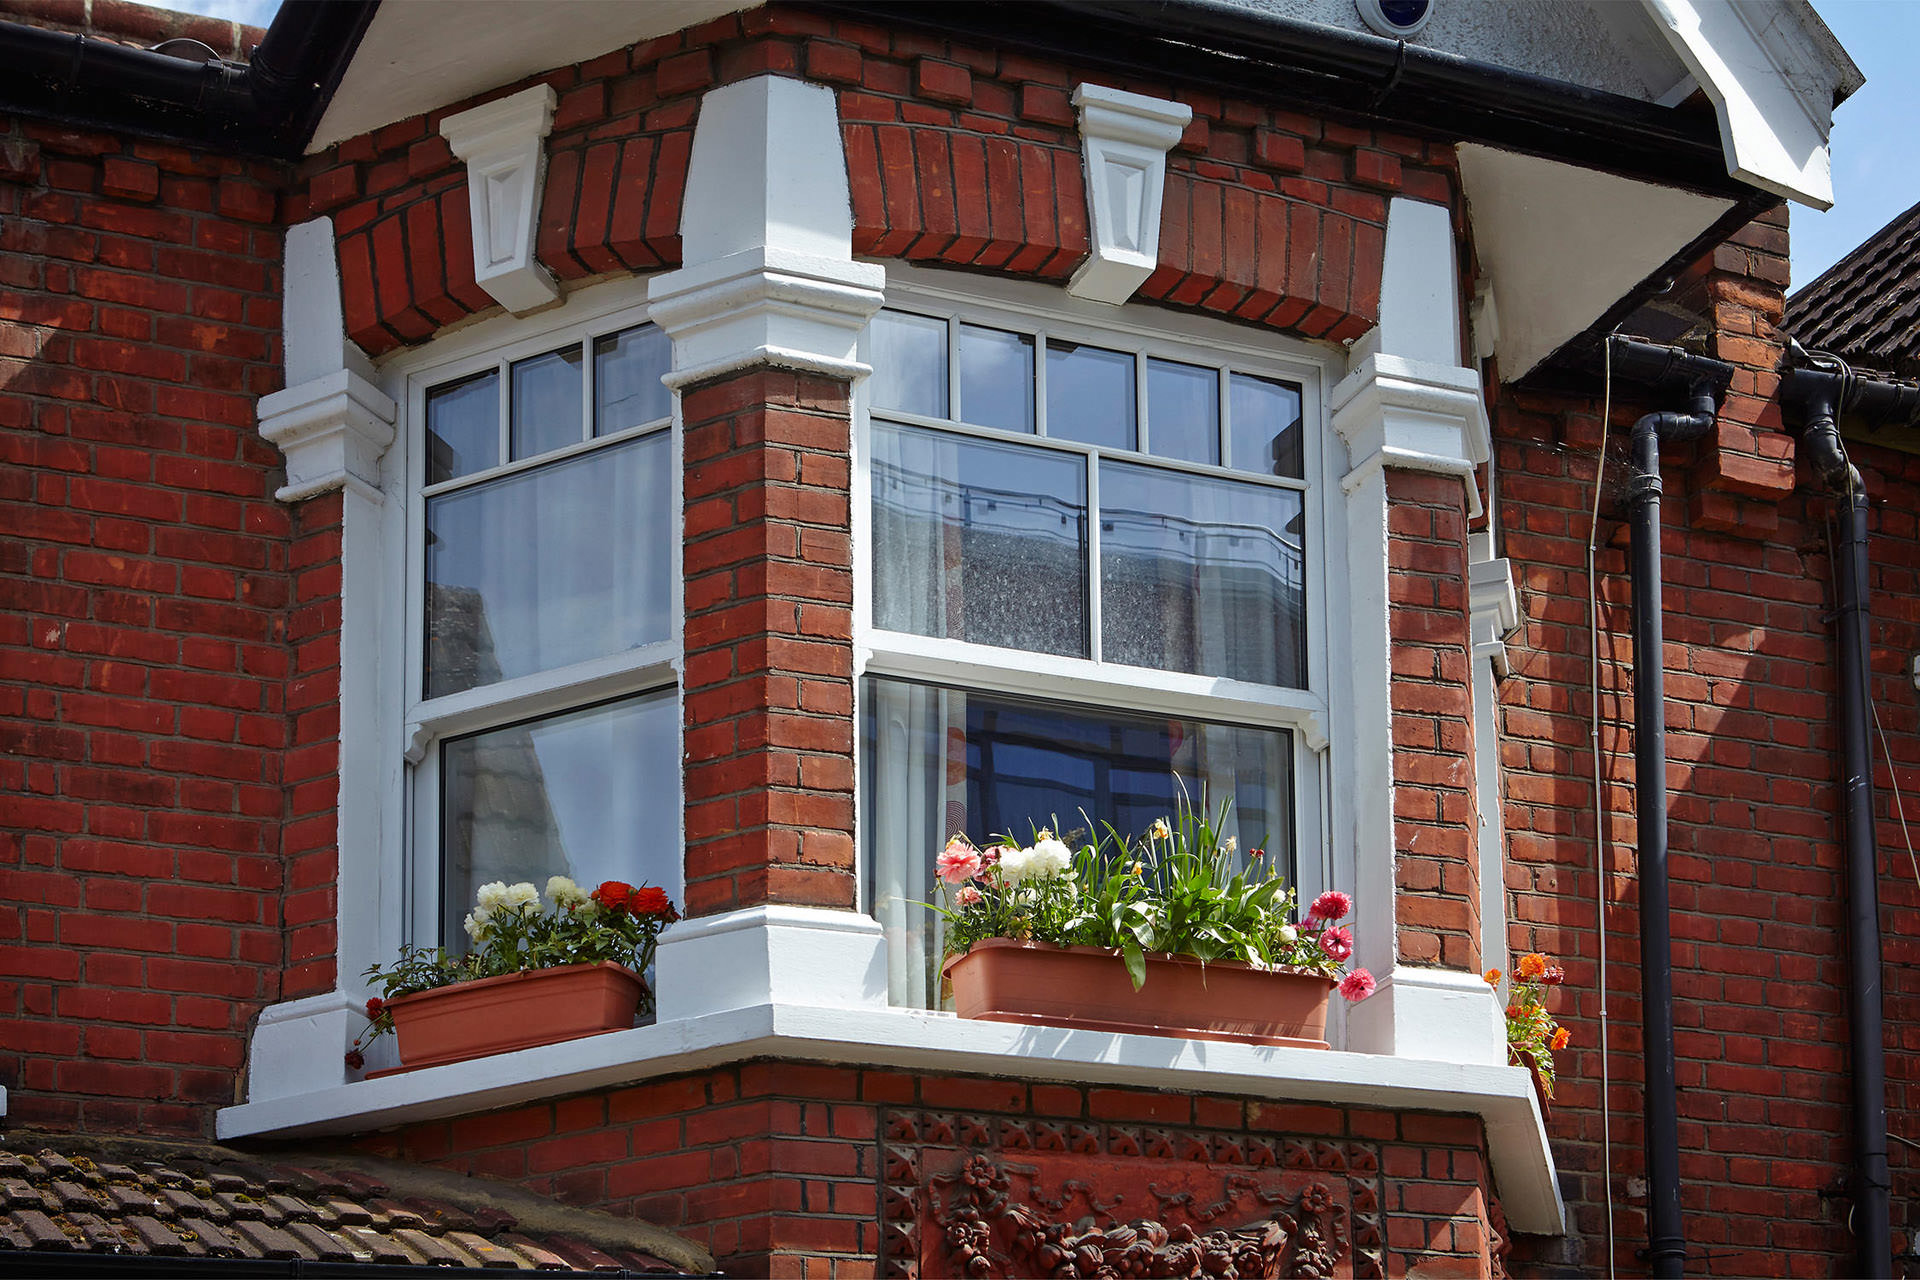 How much does double glazing cost?